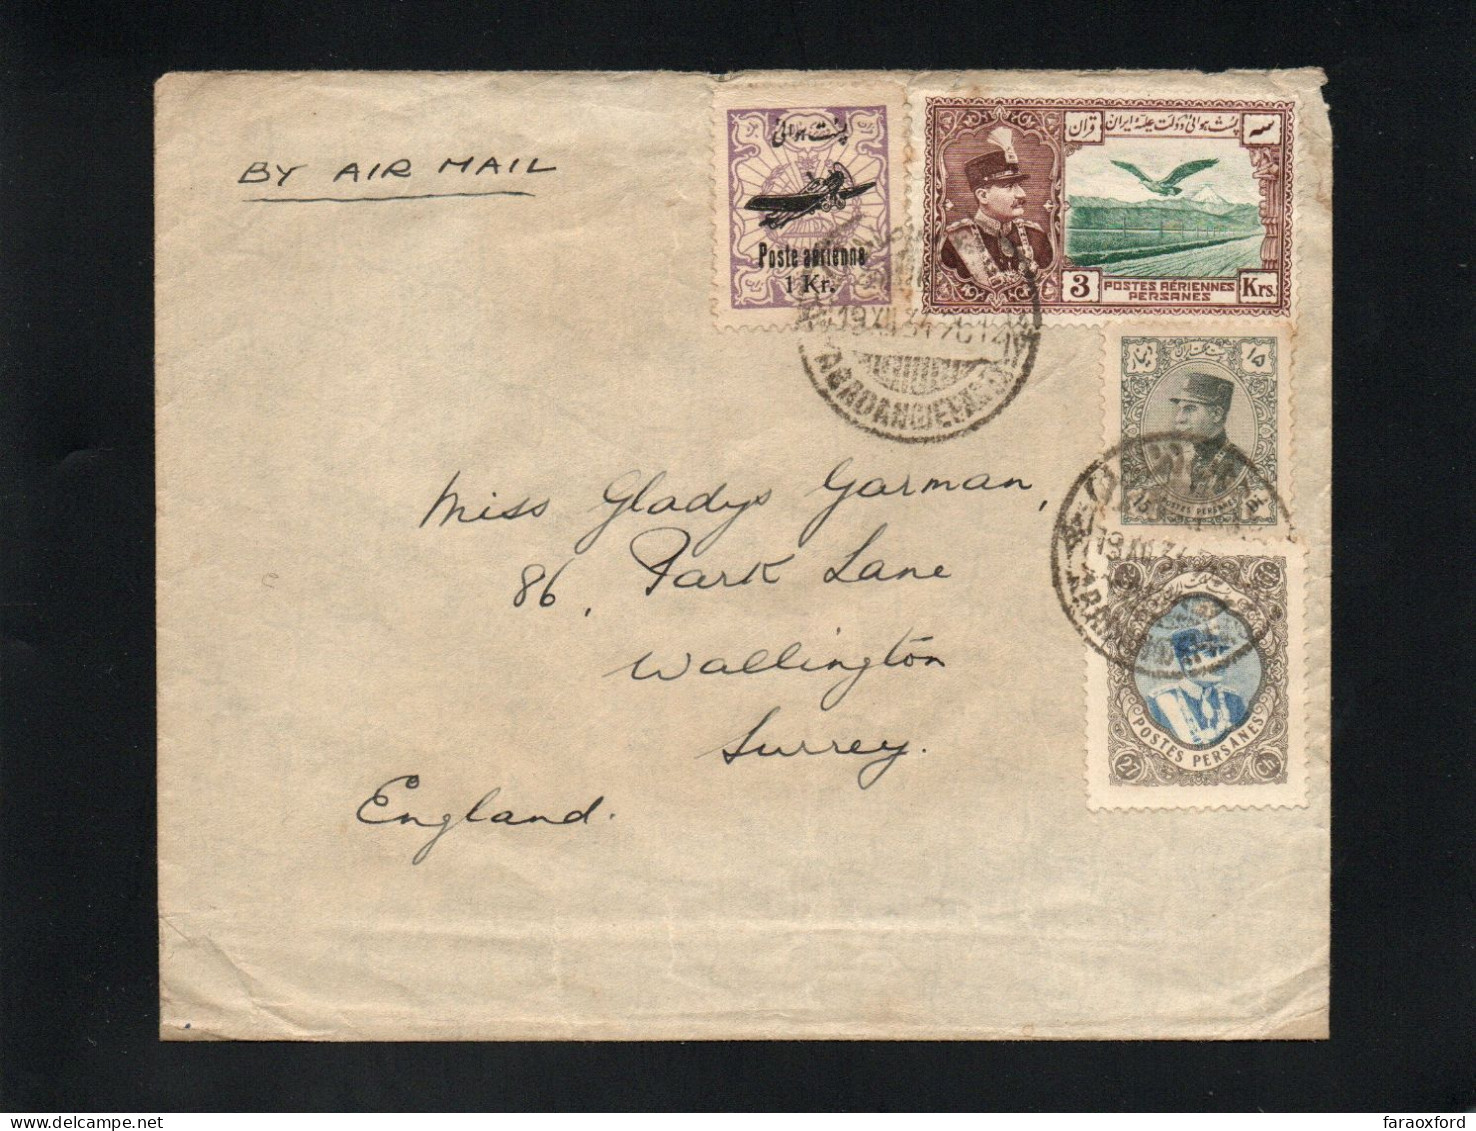 IRAN - ايران - PERSIA - 1934 - POSTAL HISTORY - HIGH VALUE AIR STAMPS ON COVER - WITH ABADAN CDS - Iran